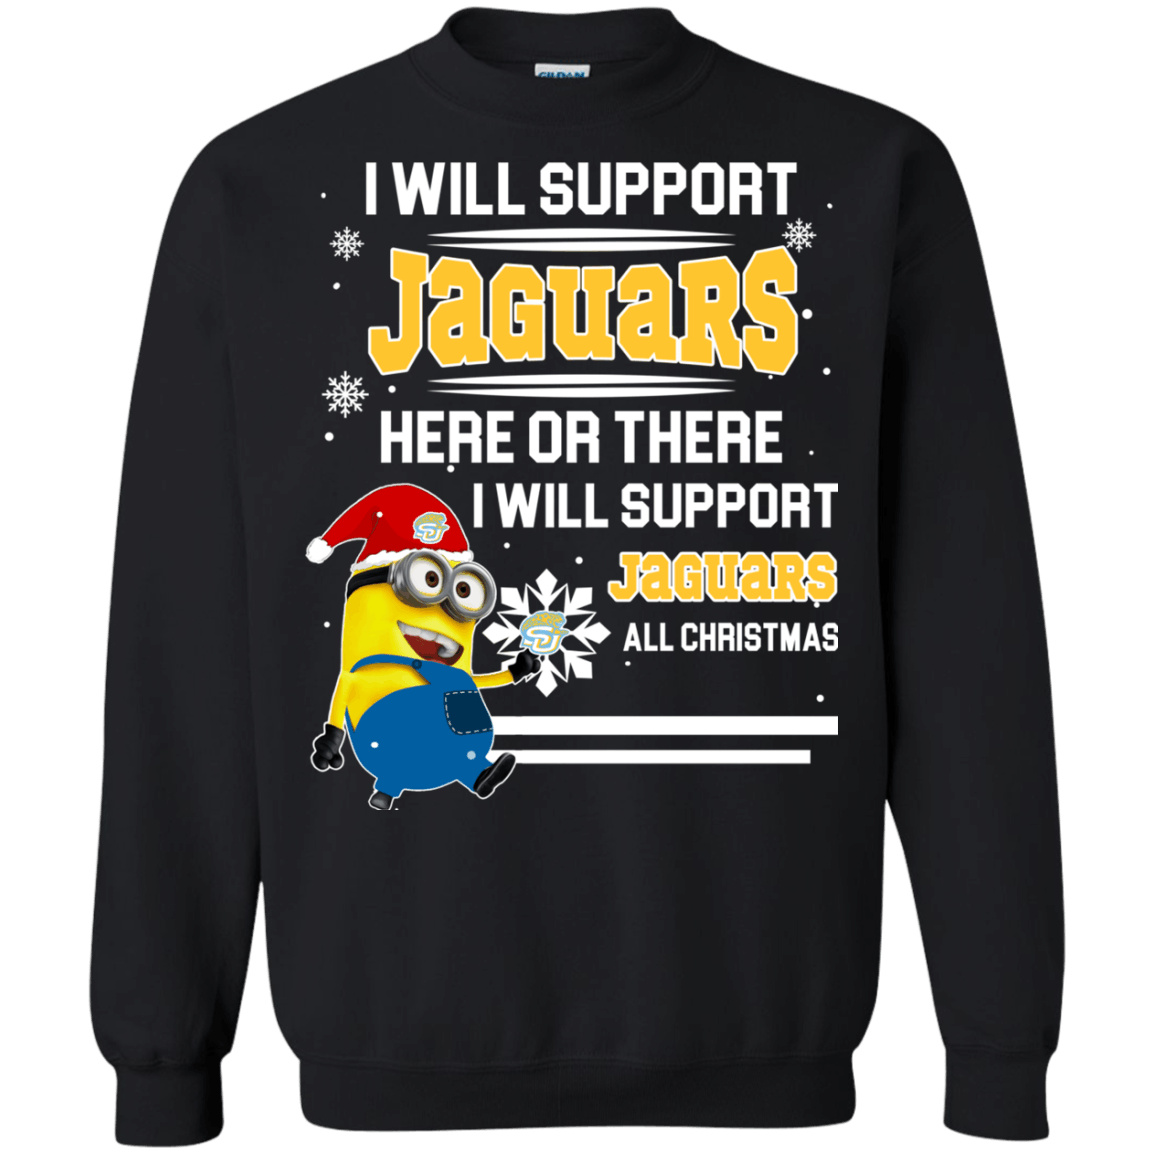 Awesome Southern University Jaguars Minion Ugly Christmas Sweaters Support Here Or There All Christmas Sweatshirts